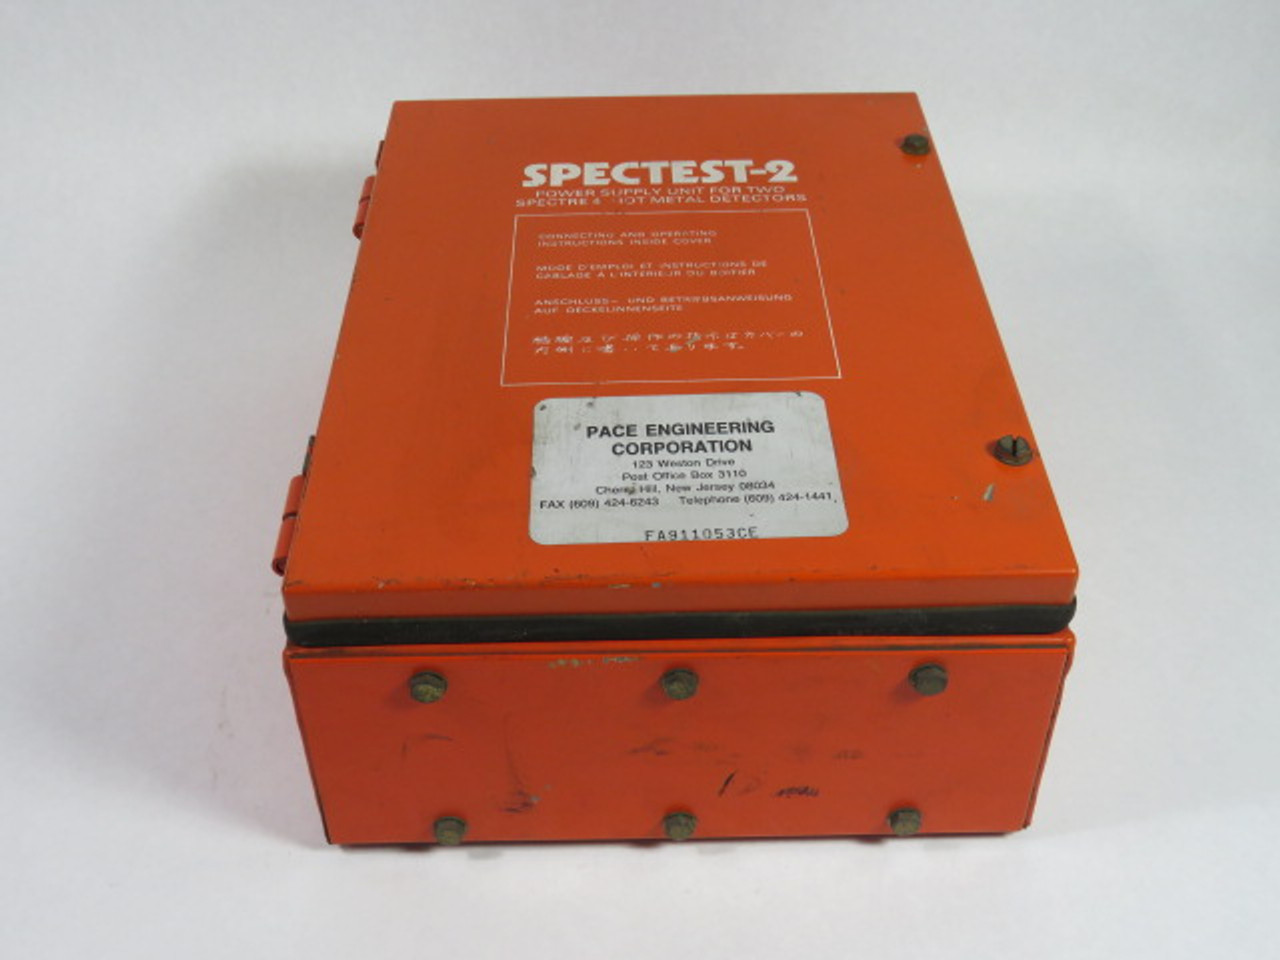 Davy McKee SPECTEST-2 Power Supply For Two Spectre 4 Hot Metal Detectors USED